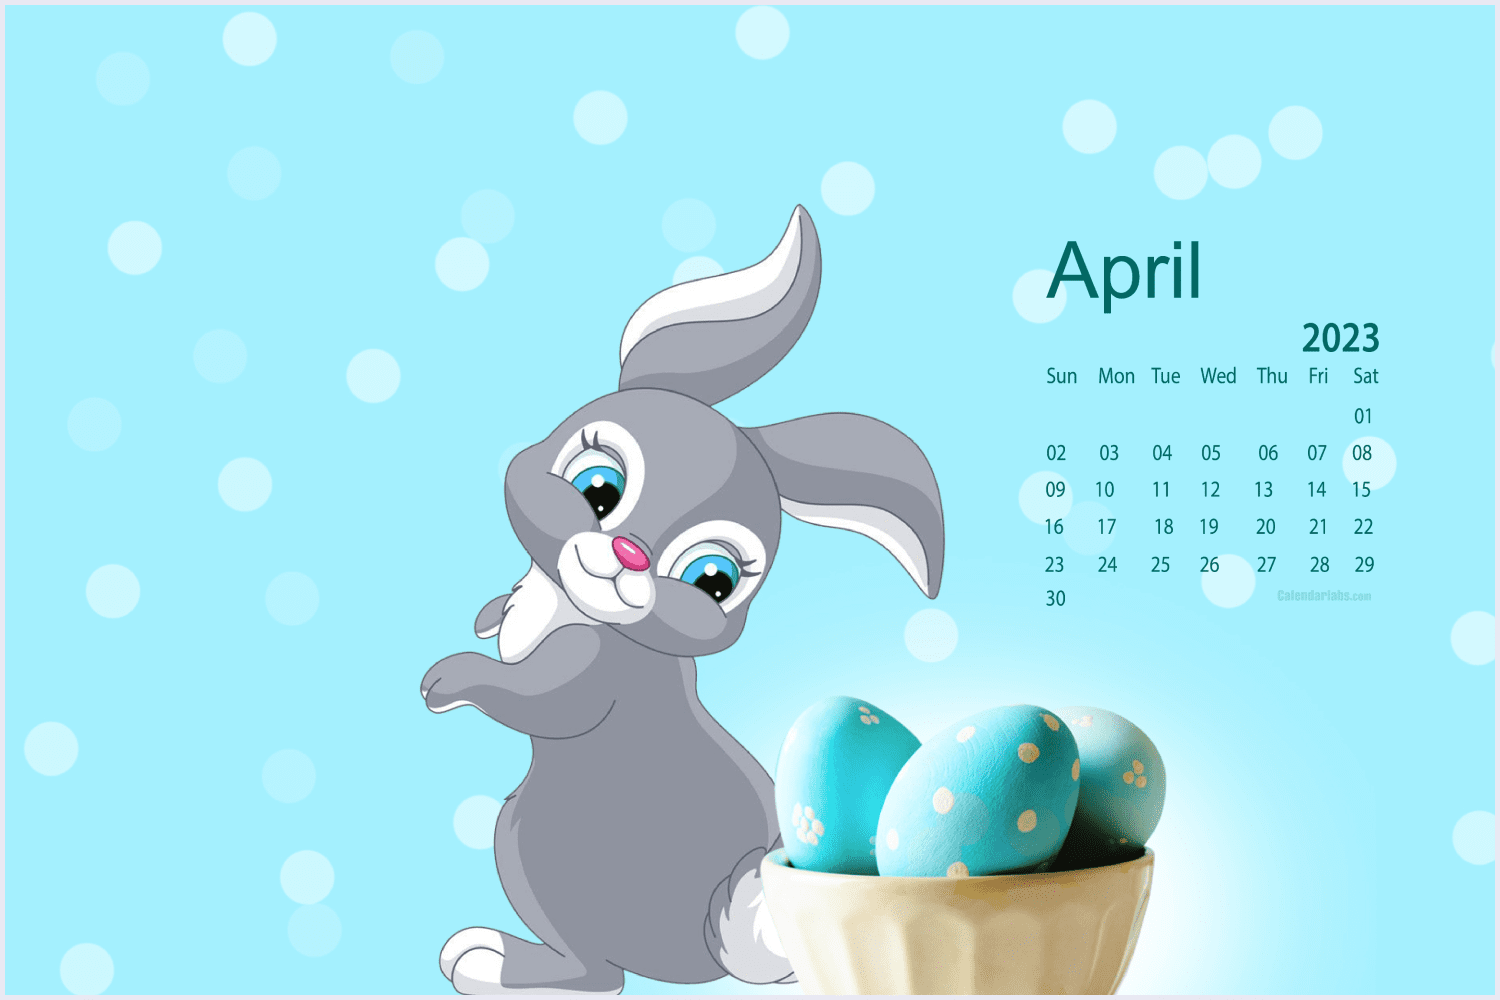 A cute April calendar depicting a handsome bunny with beautiful blue eggs.